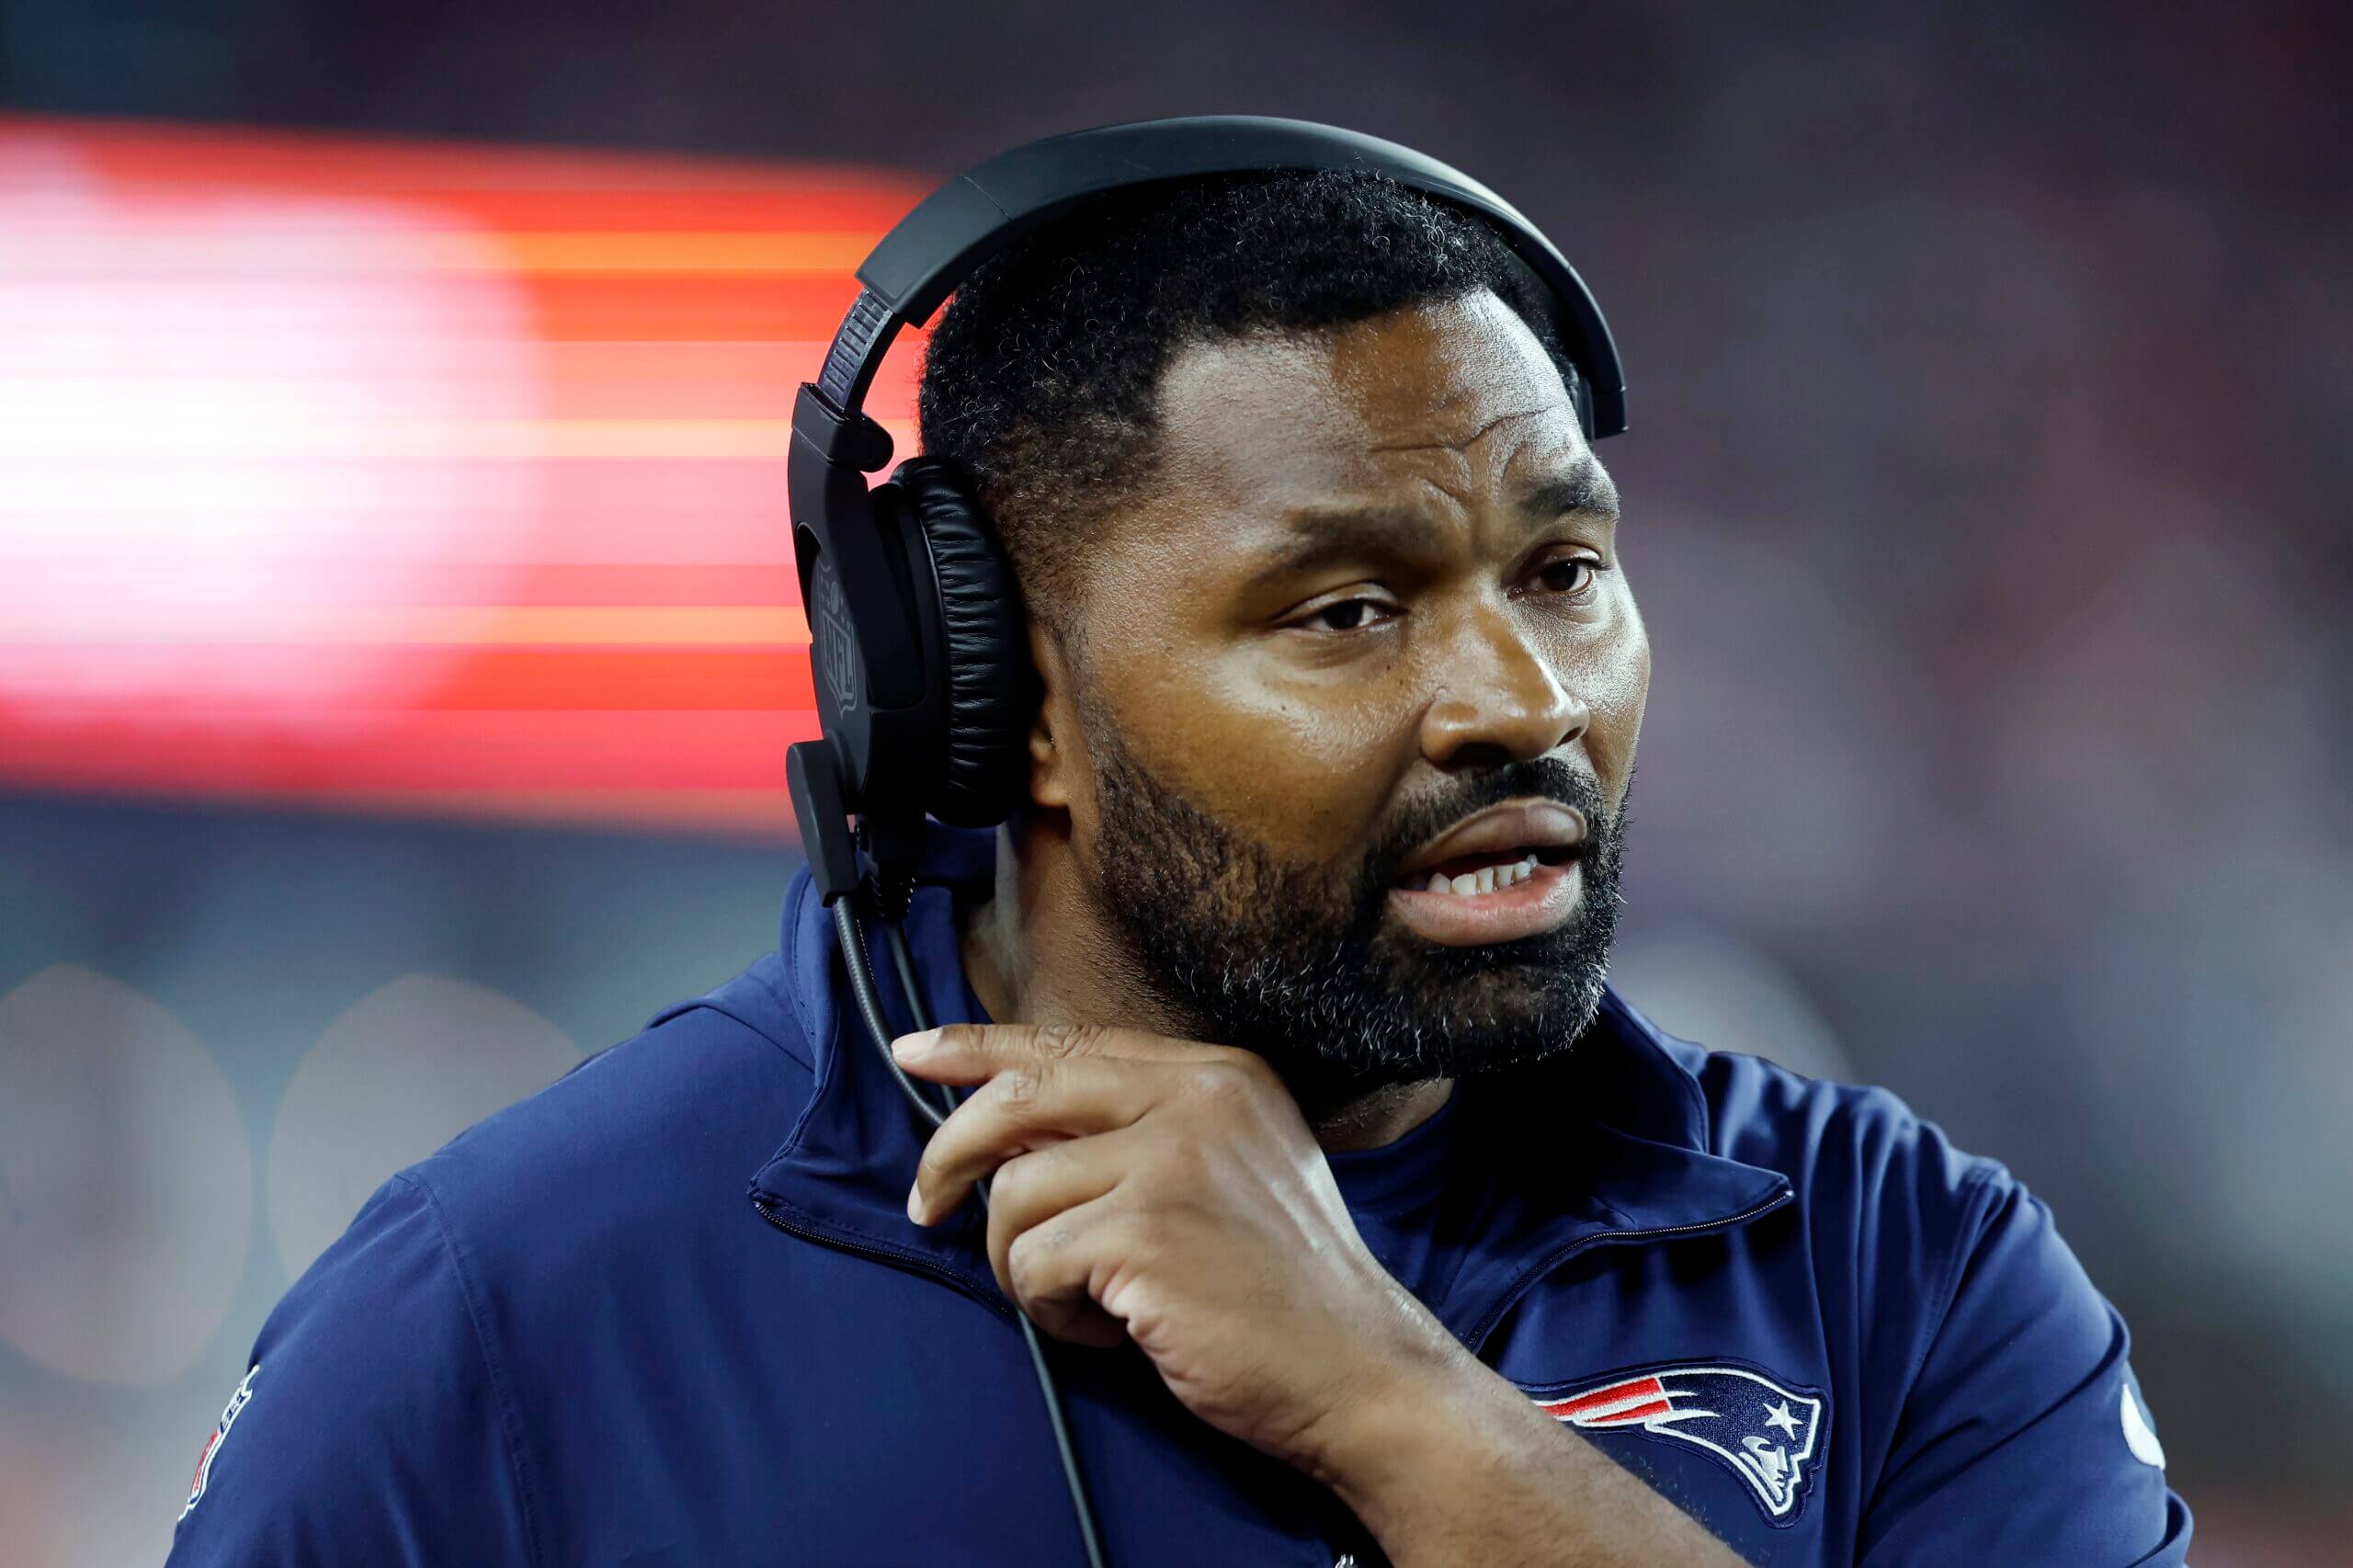  New Coach, Big Dreams: How Jerod Mayo's Plan Could Change the Patriots' Game